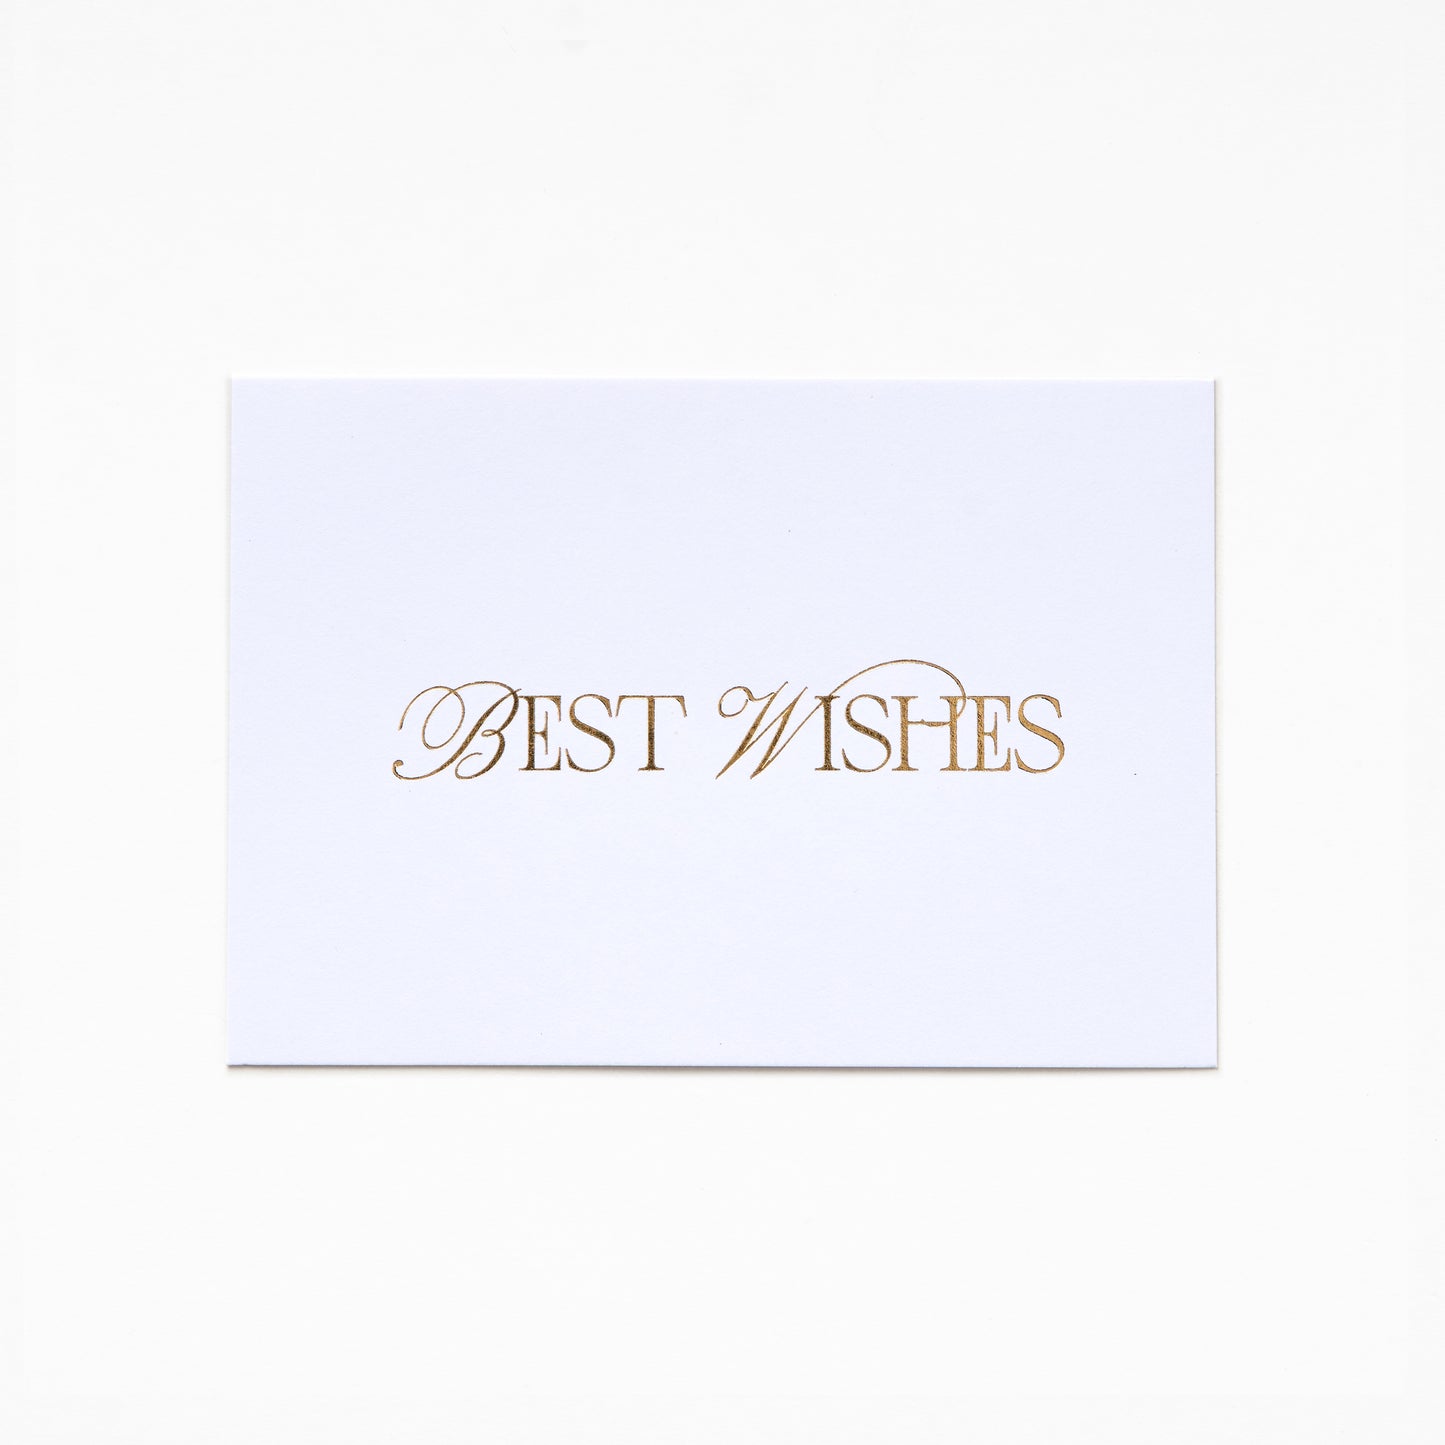 A6 Greeting Card - BEST WISHES